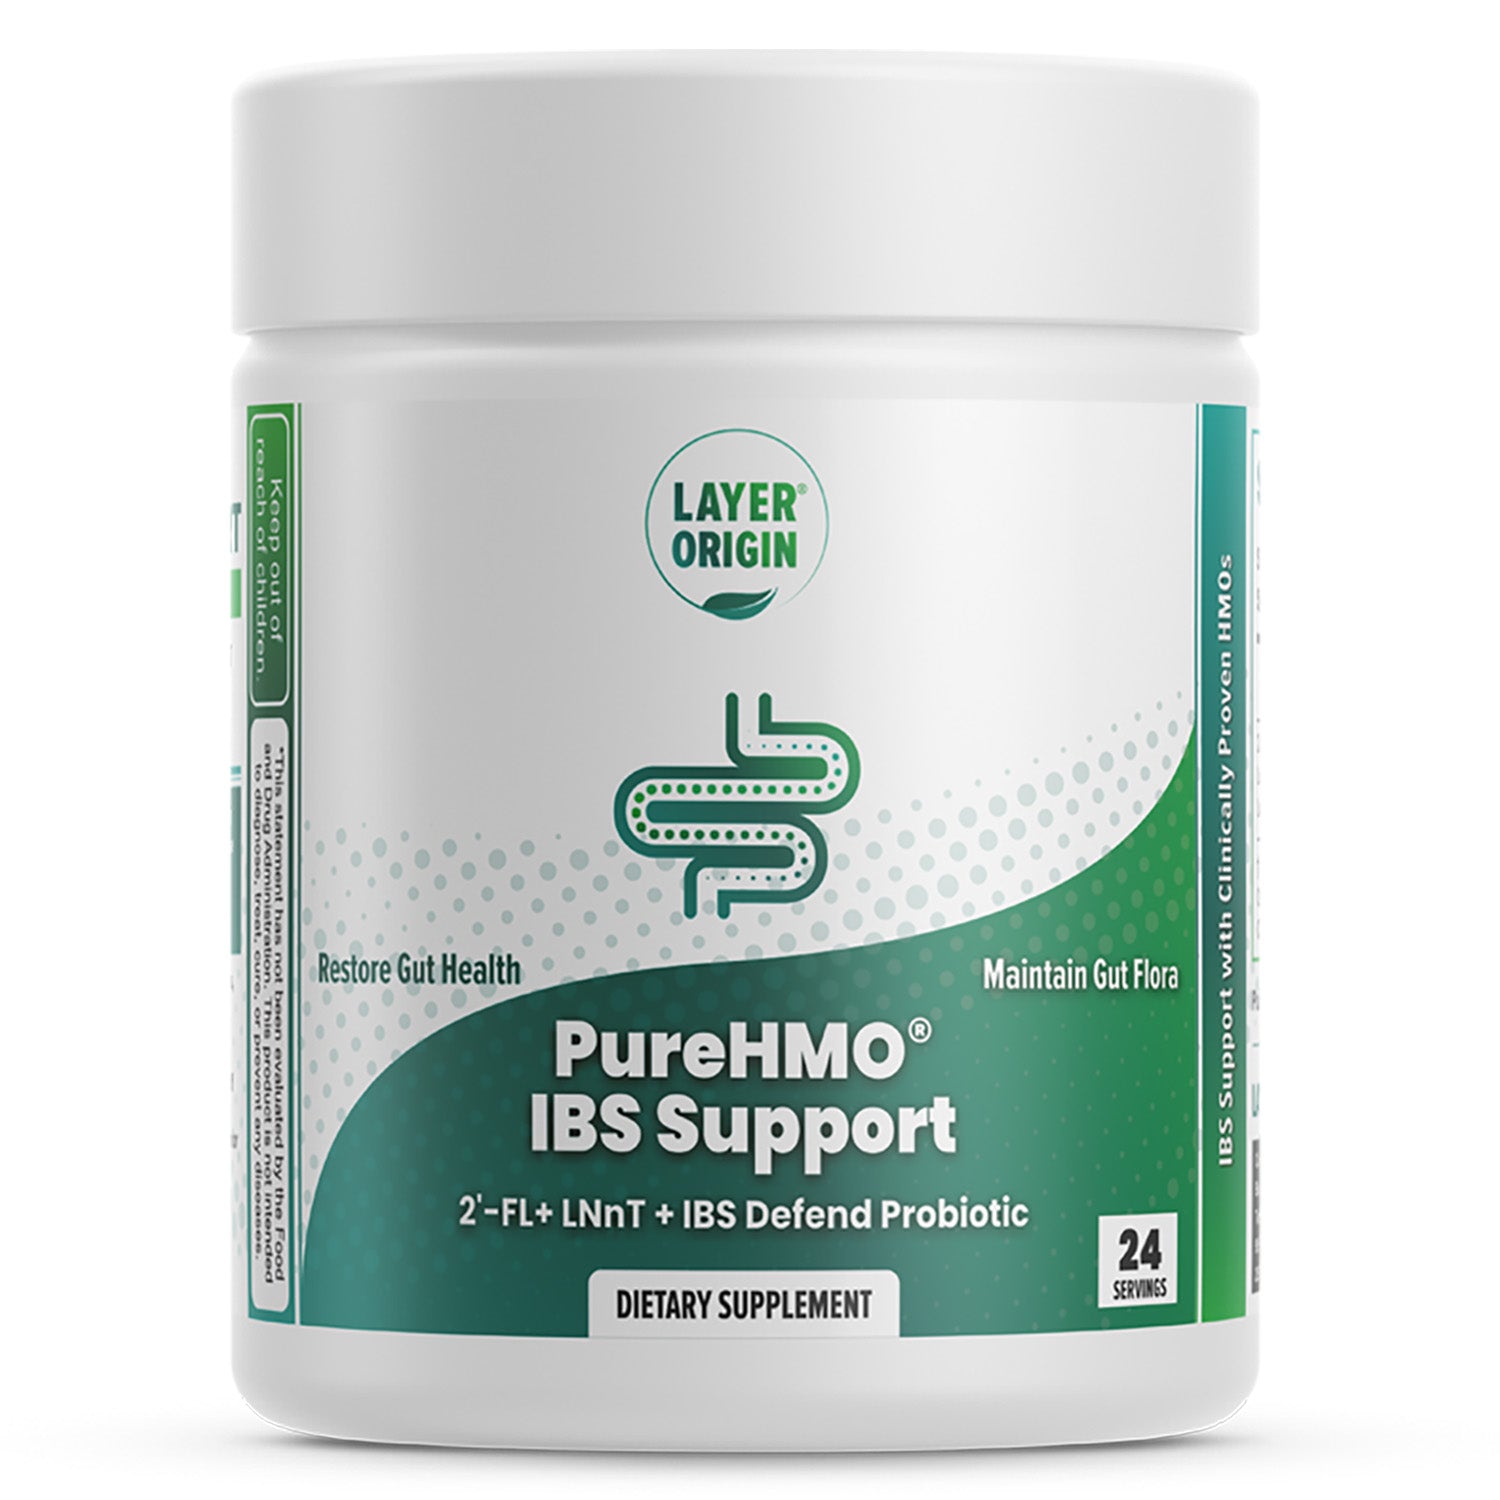 IBS support